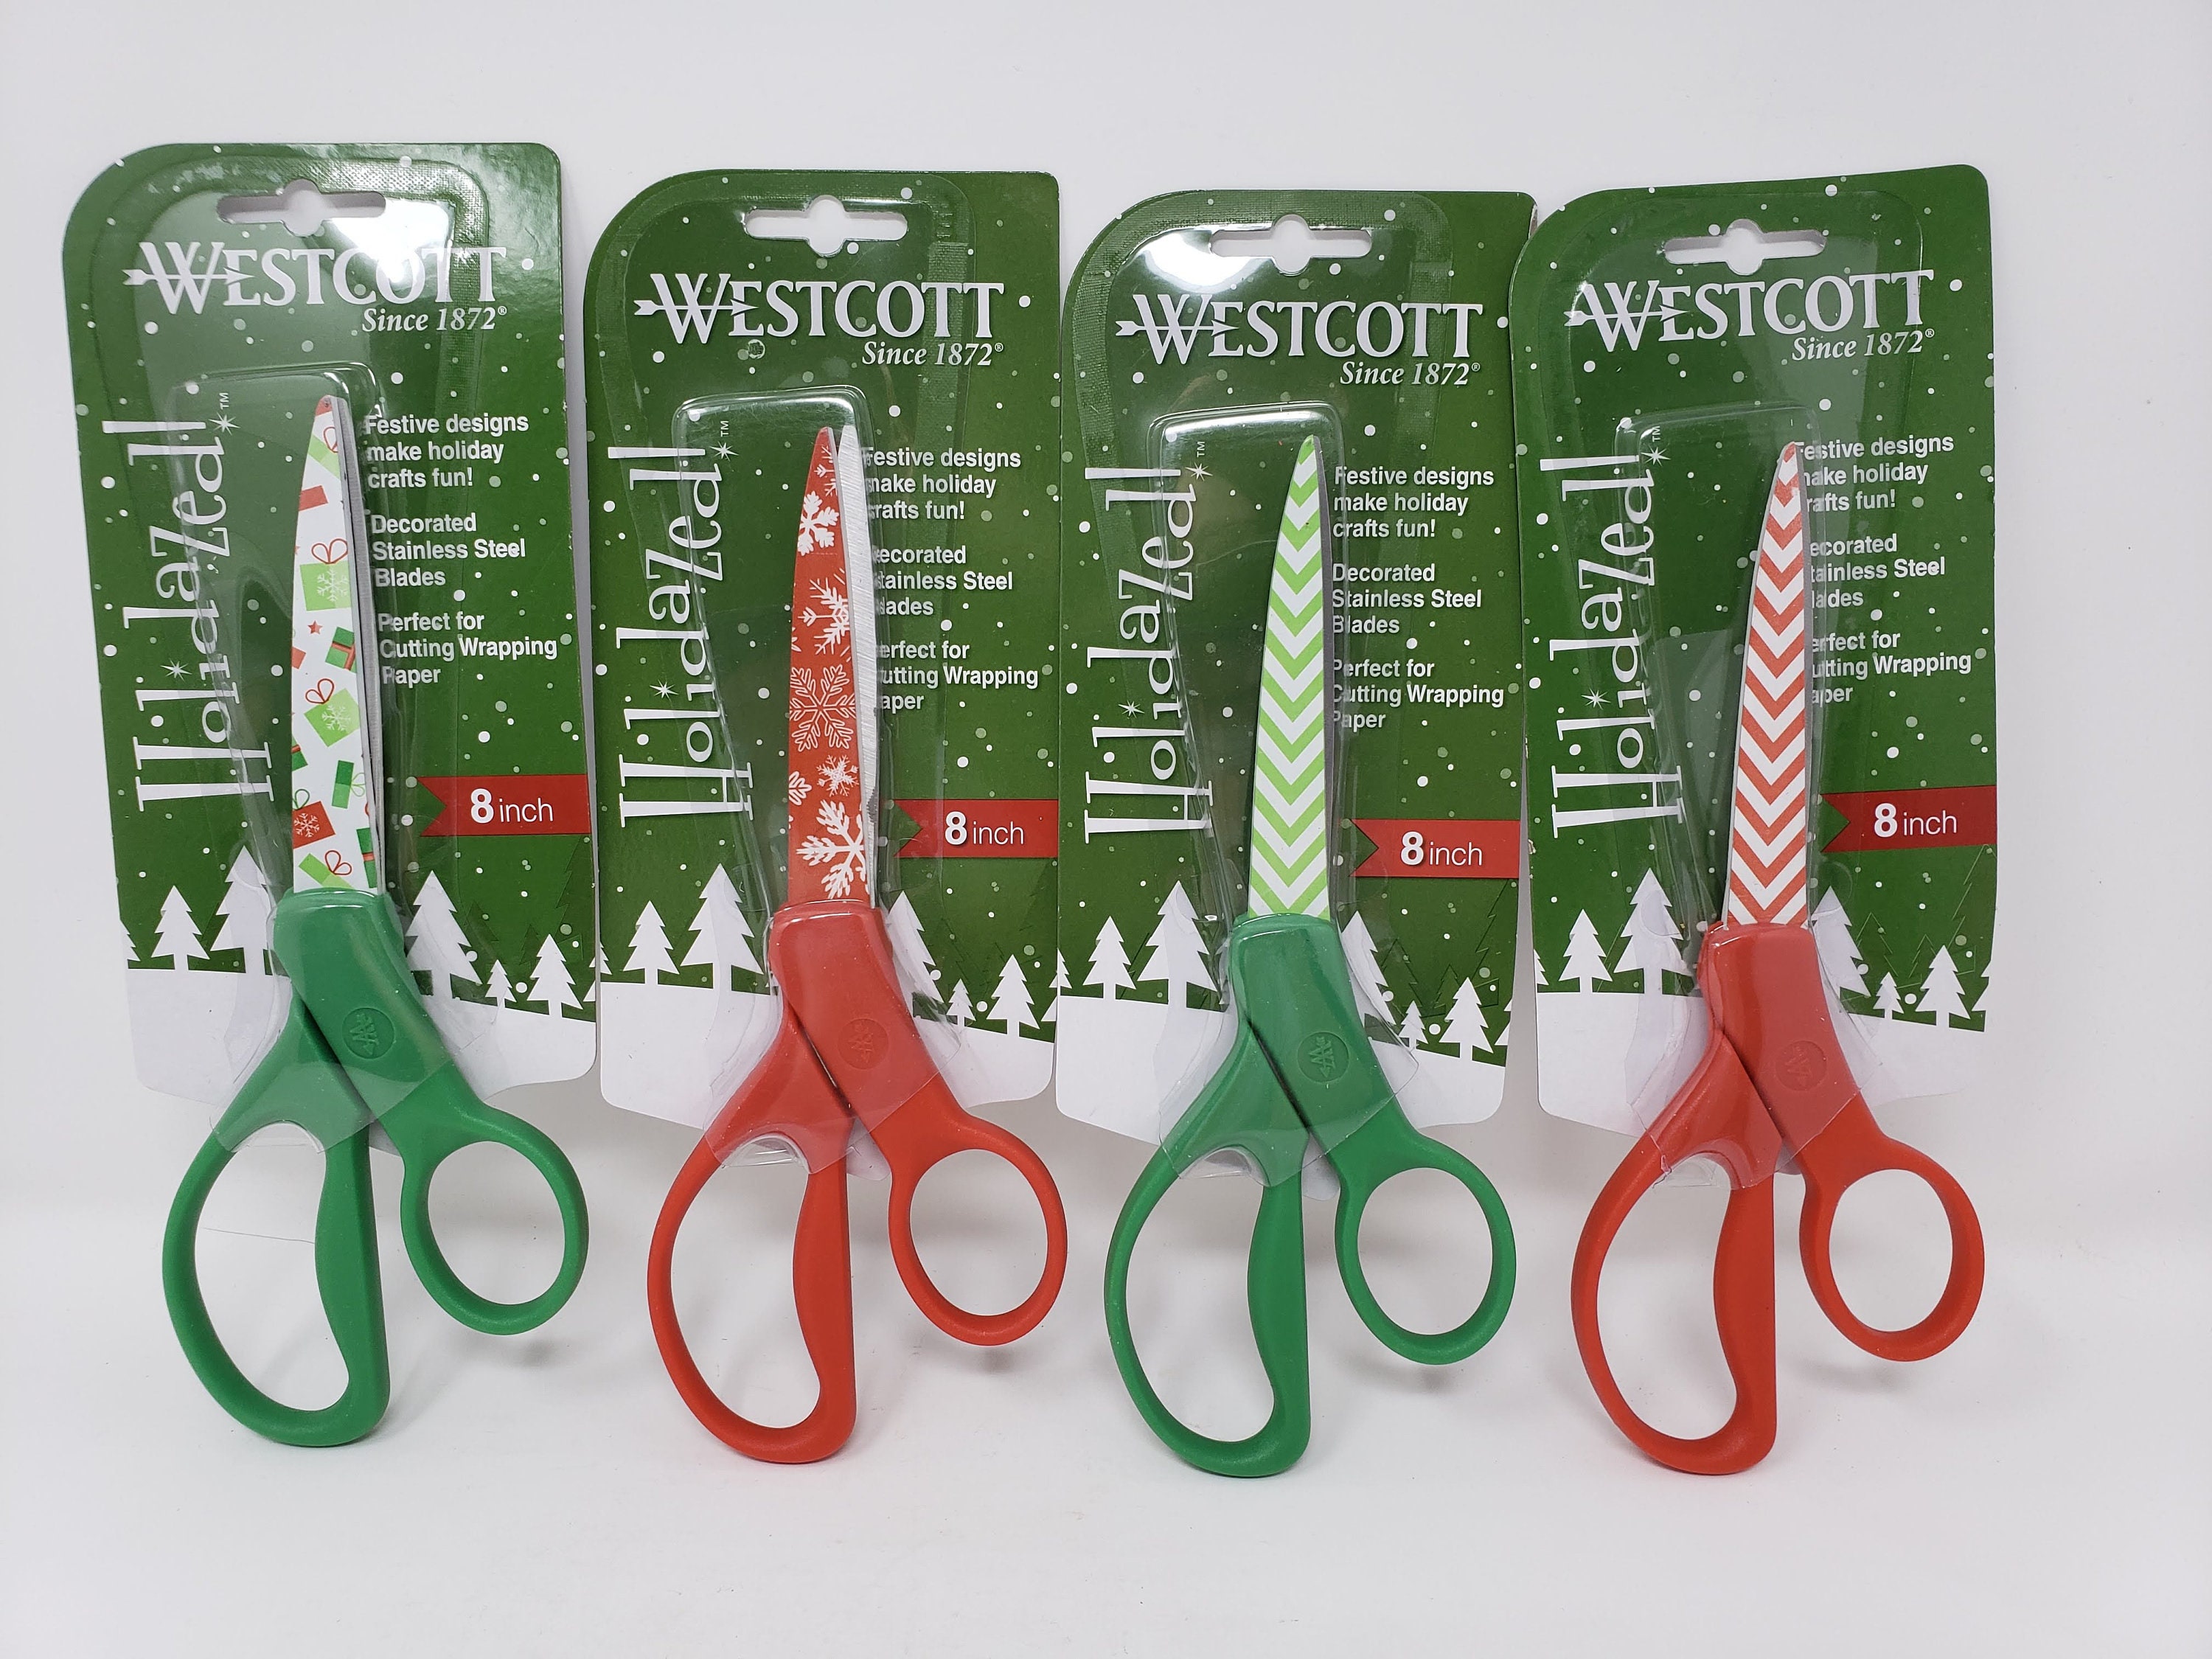 Westcott 8 Holiday Fashion Scissors, Stainless Steel, Green Dots